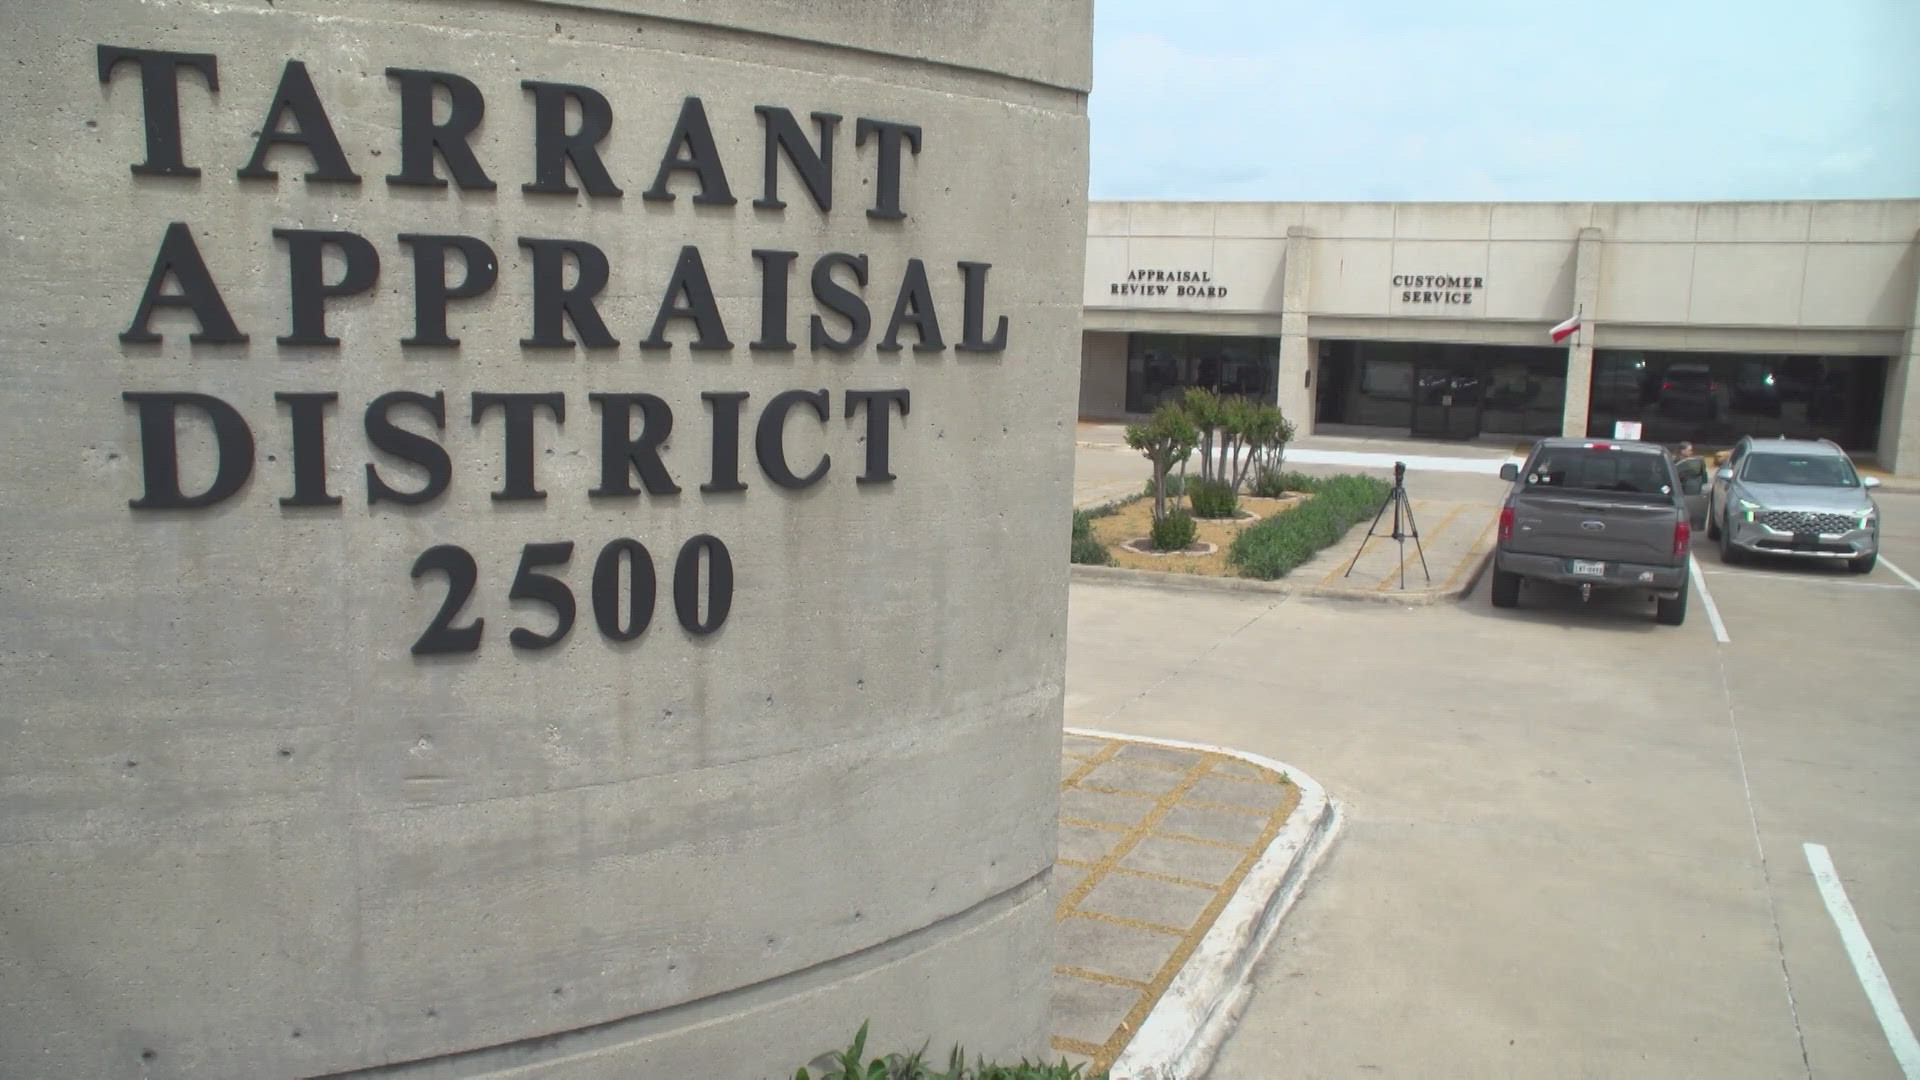 The election comes after a data breach that led to property owners' personal information being posted on the dark web, according to the Tarrant Appraisal District.